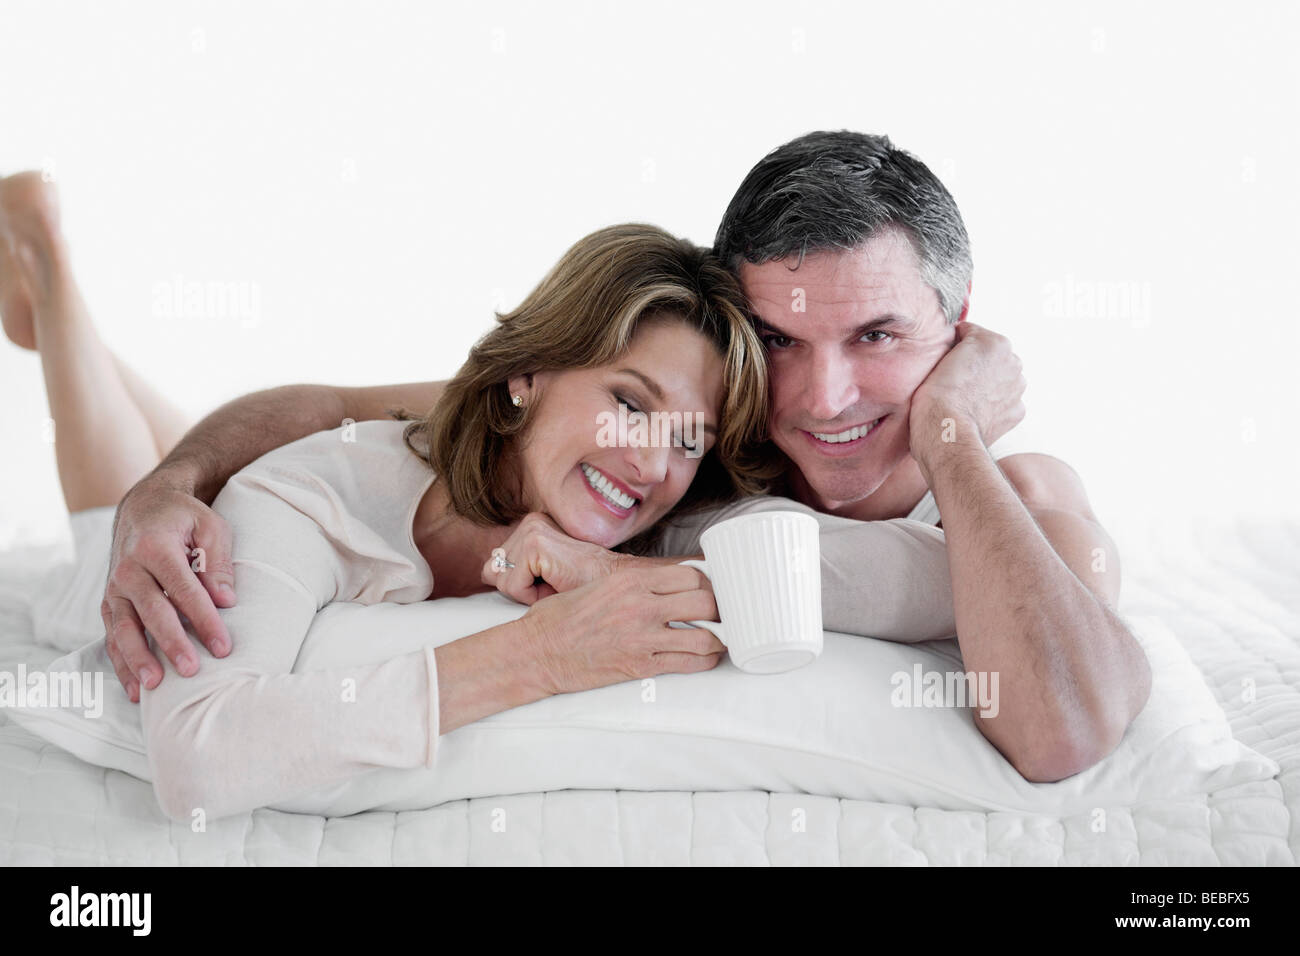 Couple lying on the bed and smiling Stock Photo